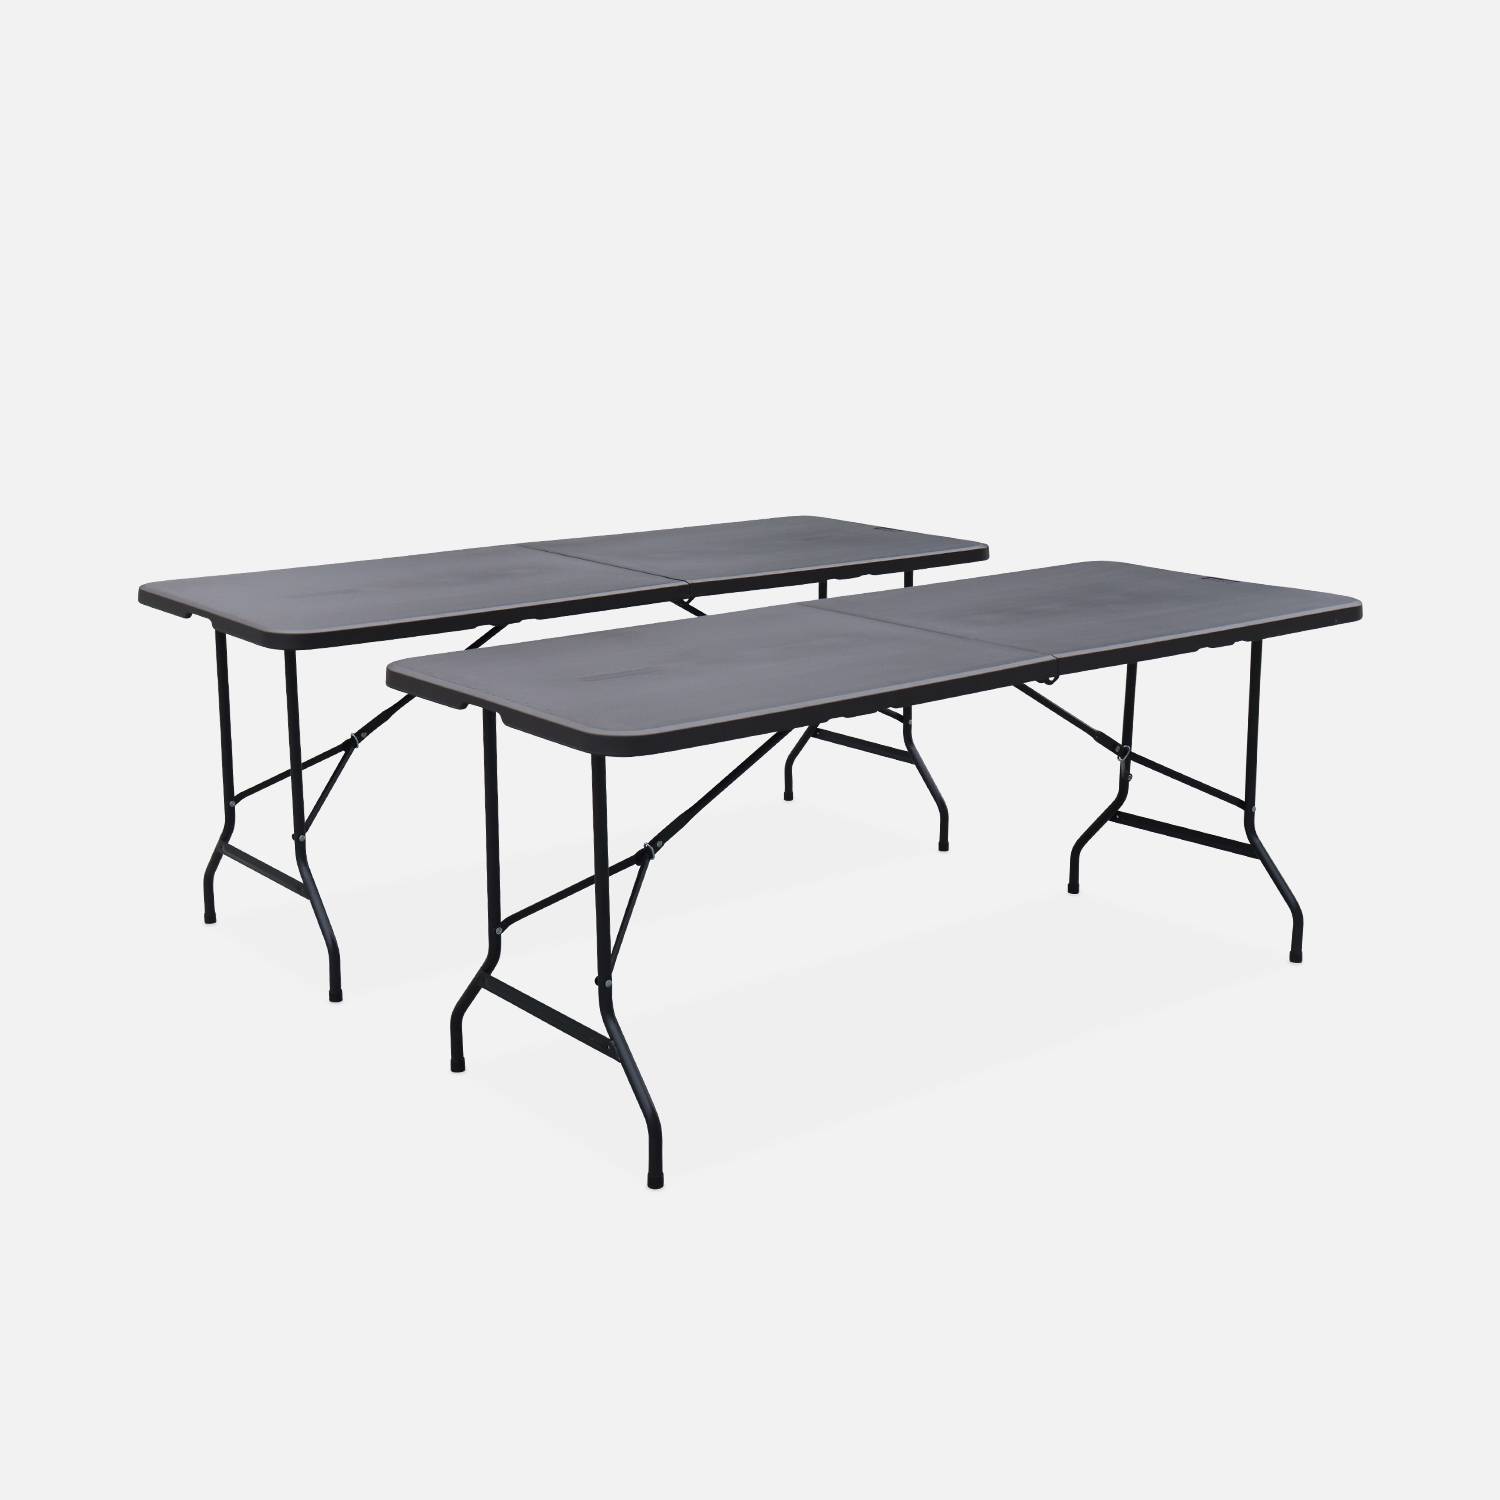 Set of 2 reception tables, 180cm, foldable, with carry handle, dark grey Photo4